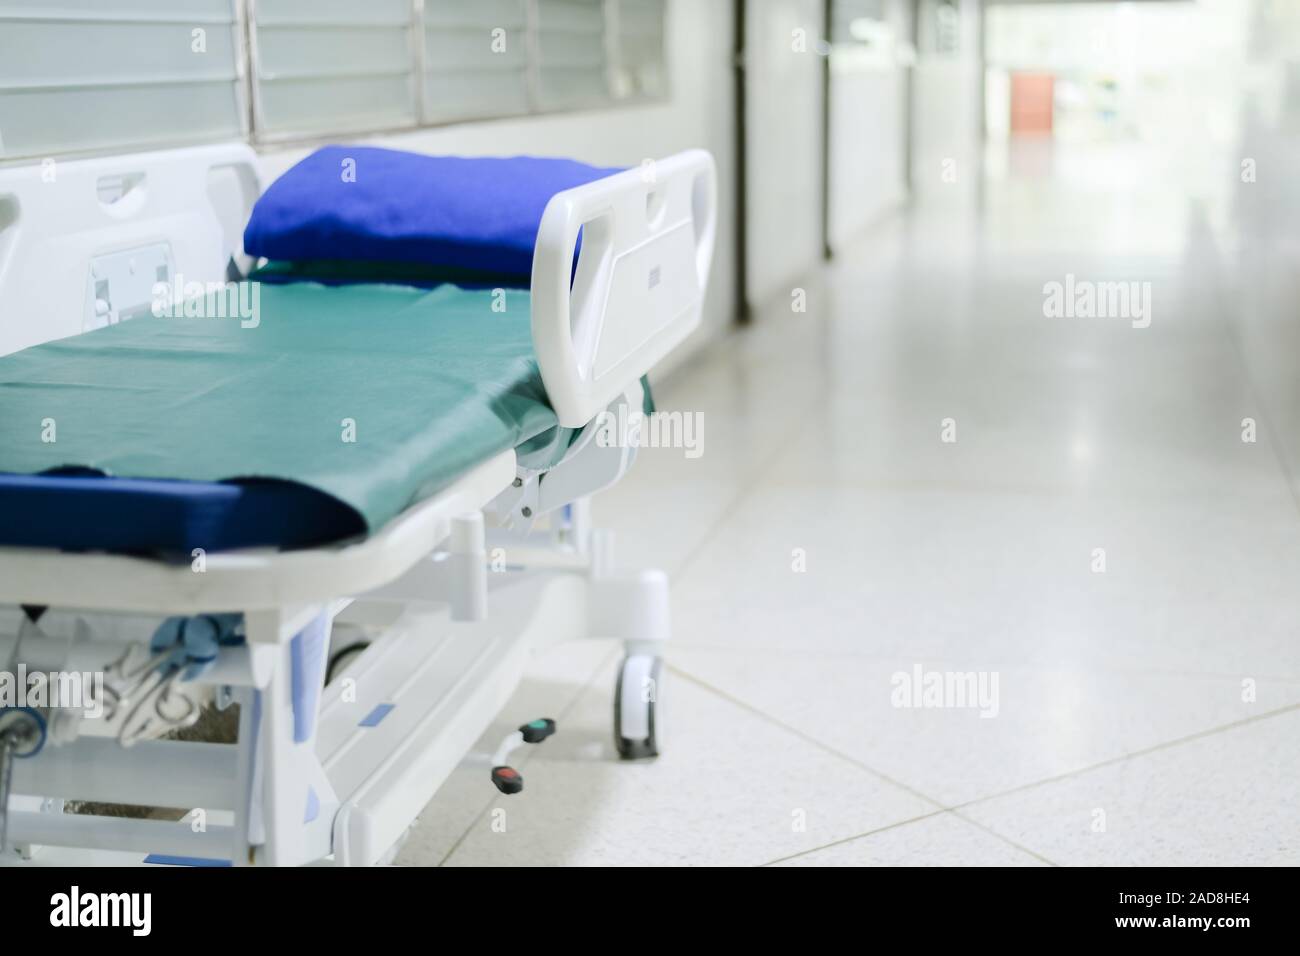 Blurred Of Medicine Shelf In The Hospital Stock Photo, Picture and Royalty  Free Image. Image 78013599.